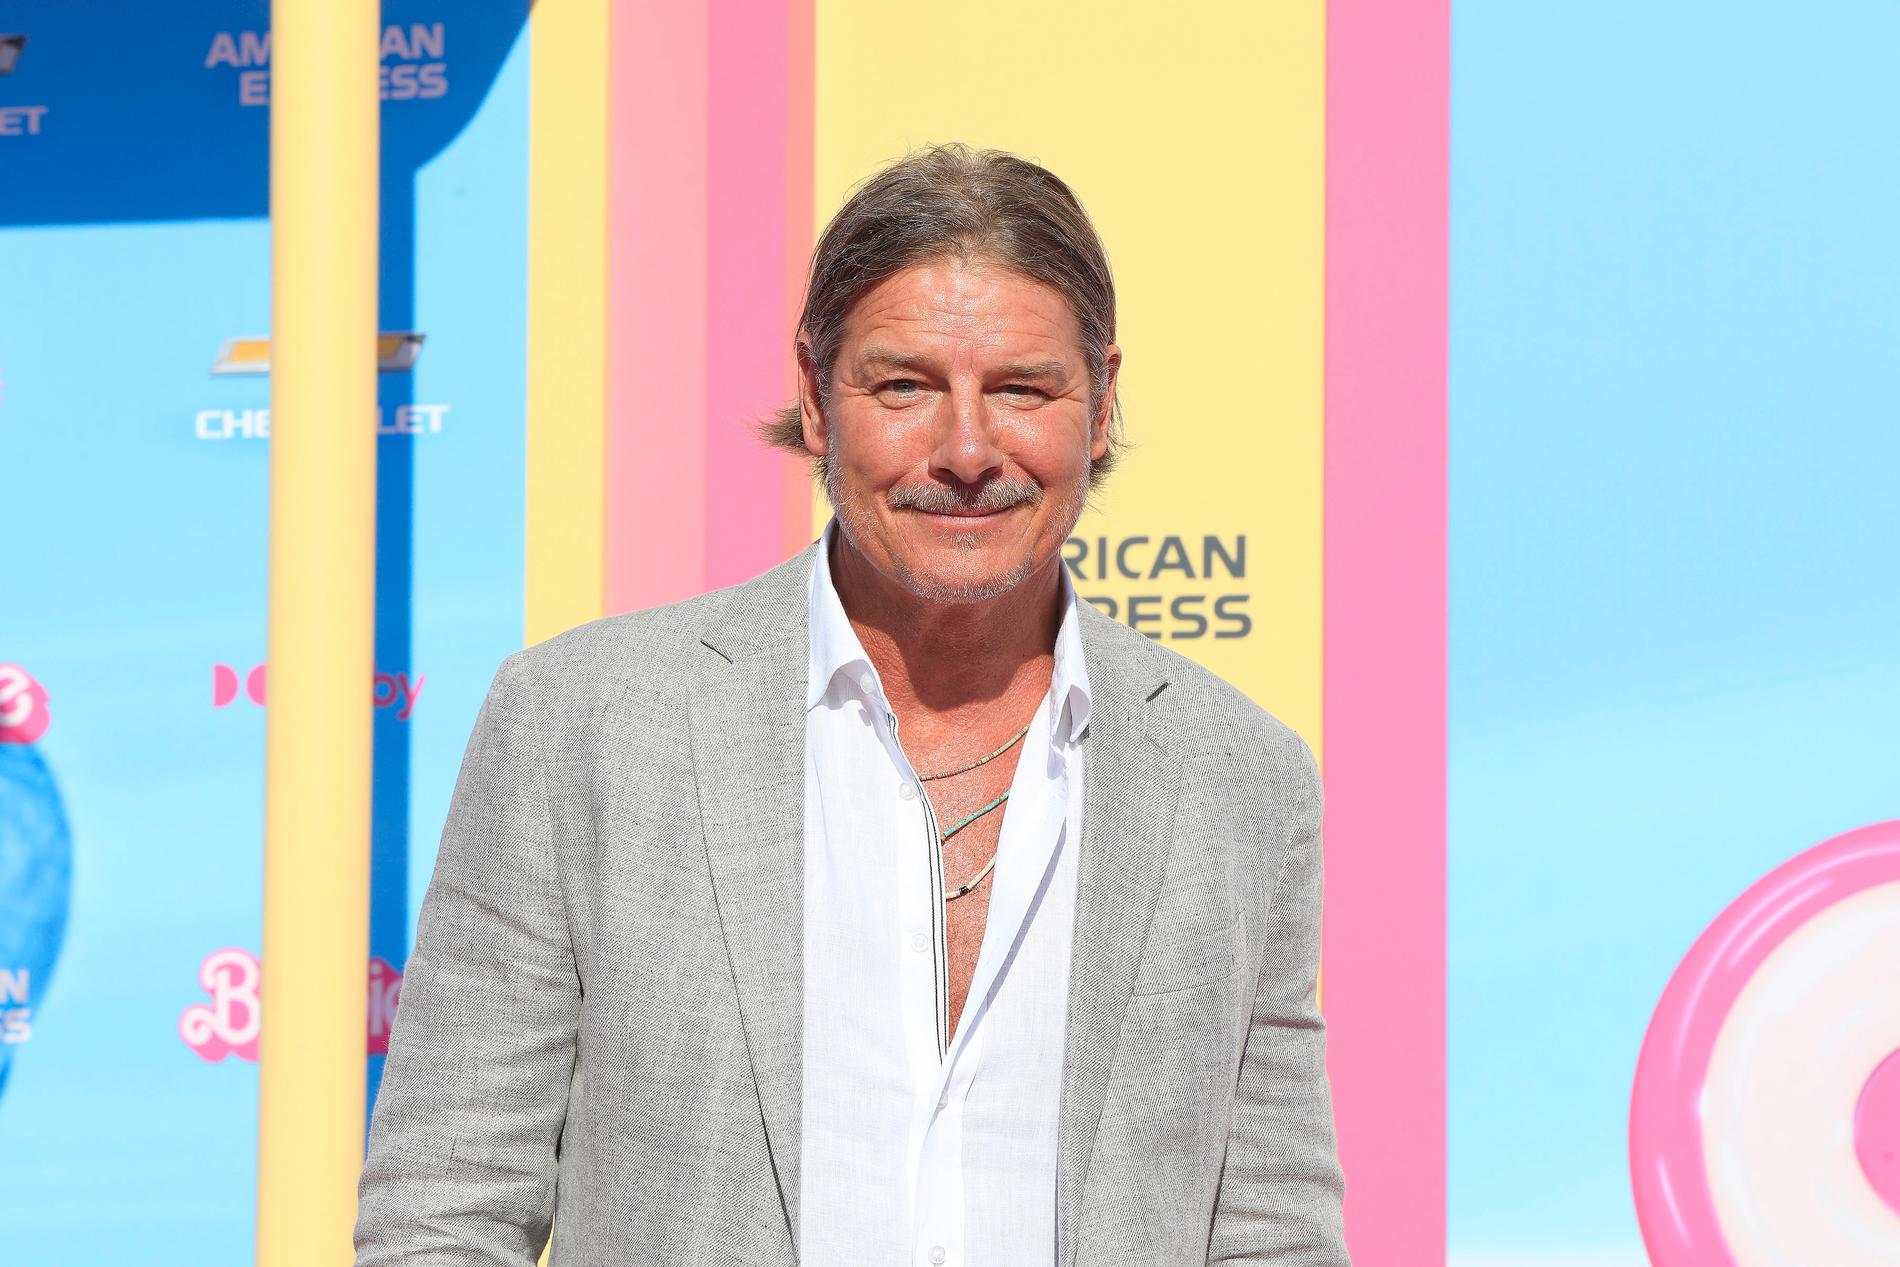 ‘Extreme Makeover’ star Ty Pennington has been hospitalized